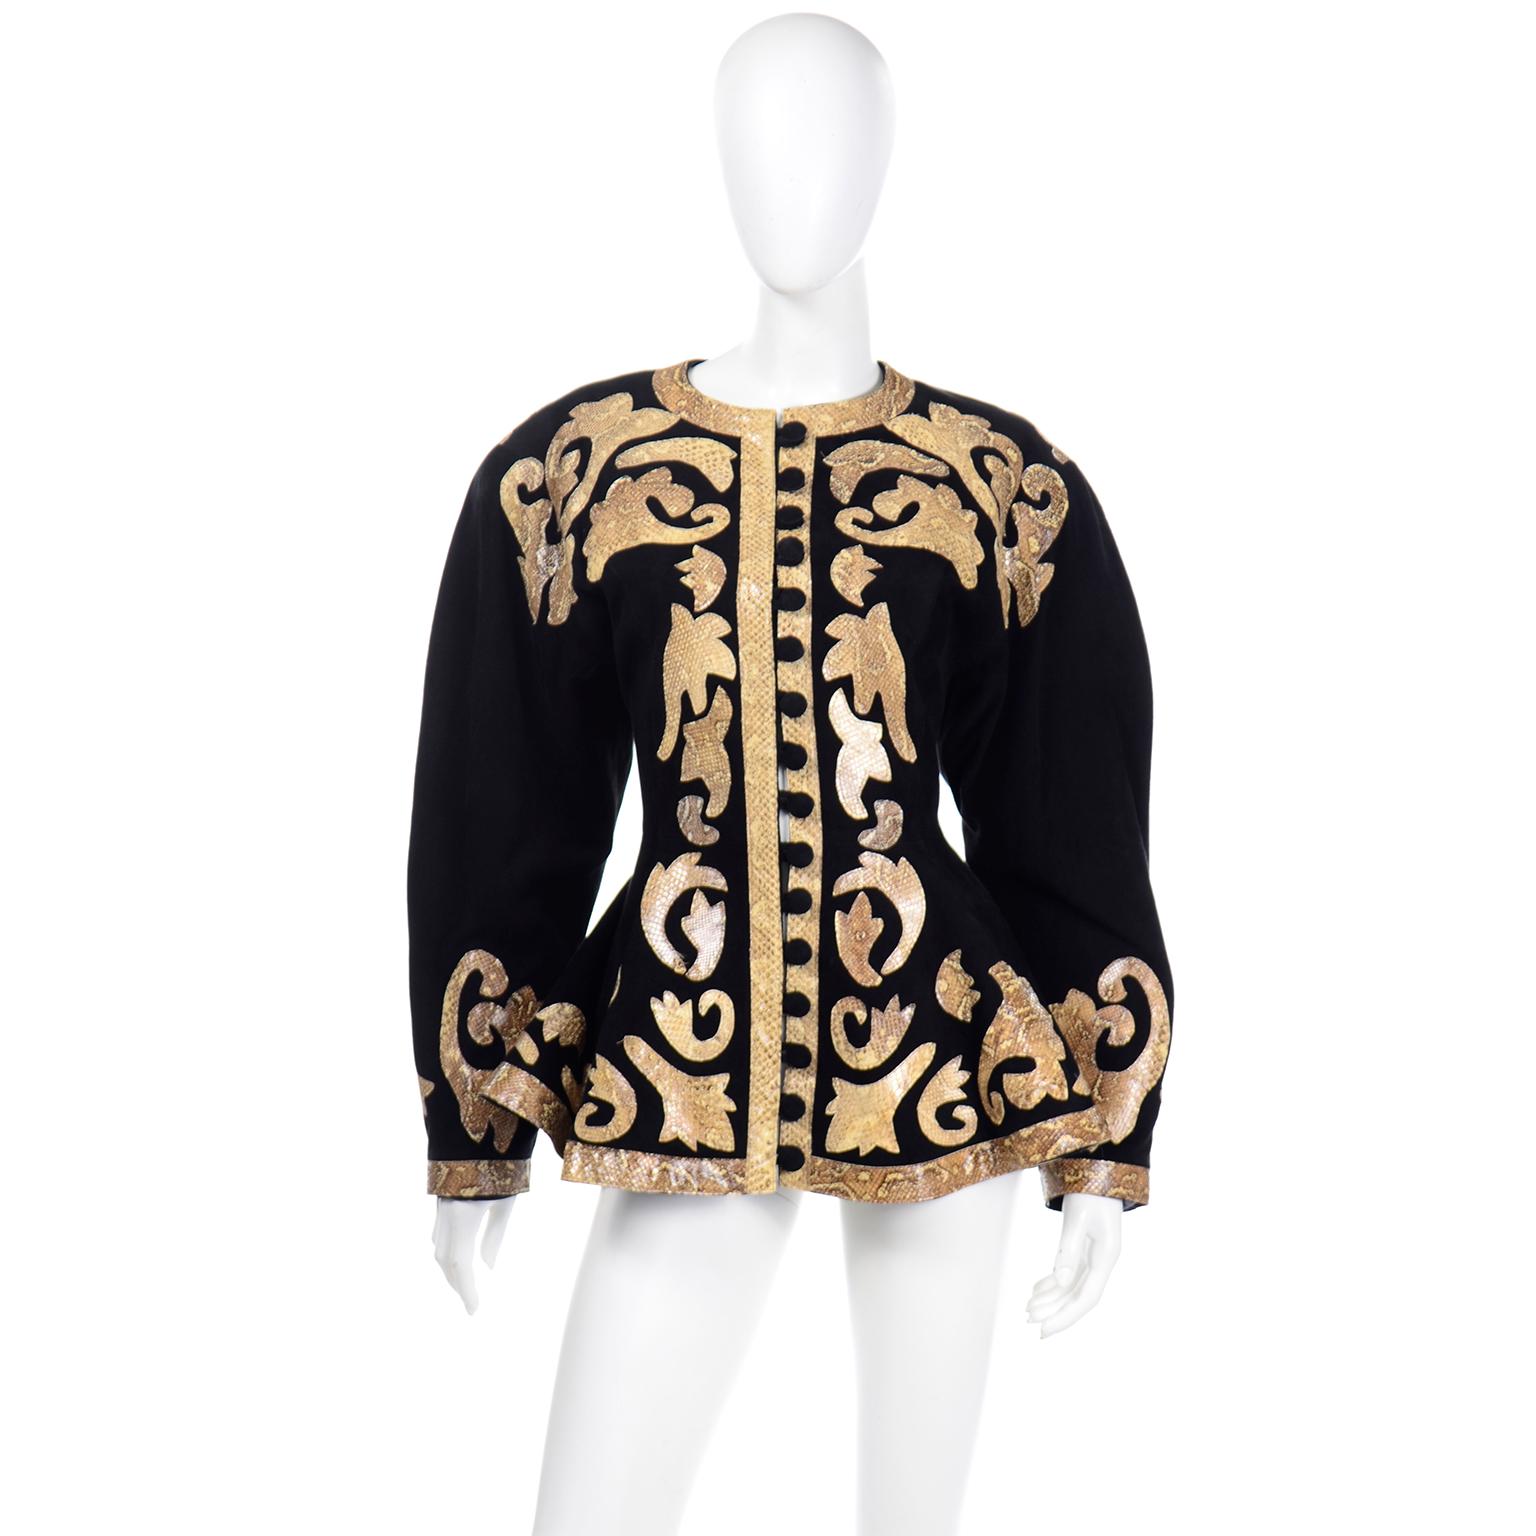 This is an absolutely stunning vintage black suede jacket with fabulous python snakeskin baroque appliques and fabric covered black buttons up the front. The jacket has the 1980's rounded oversized shoulders, a round neck, and a fitted waist with a